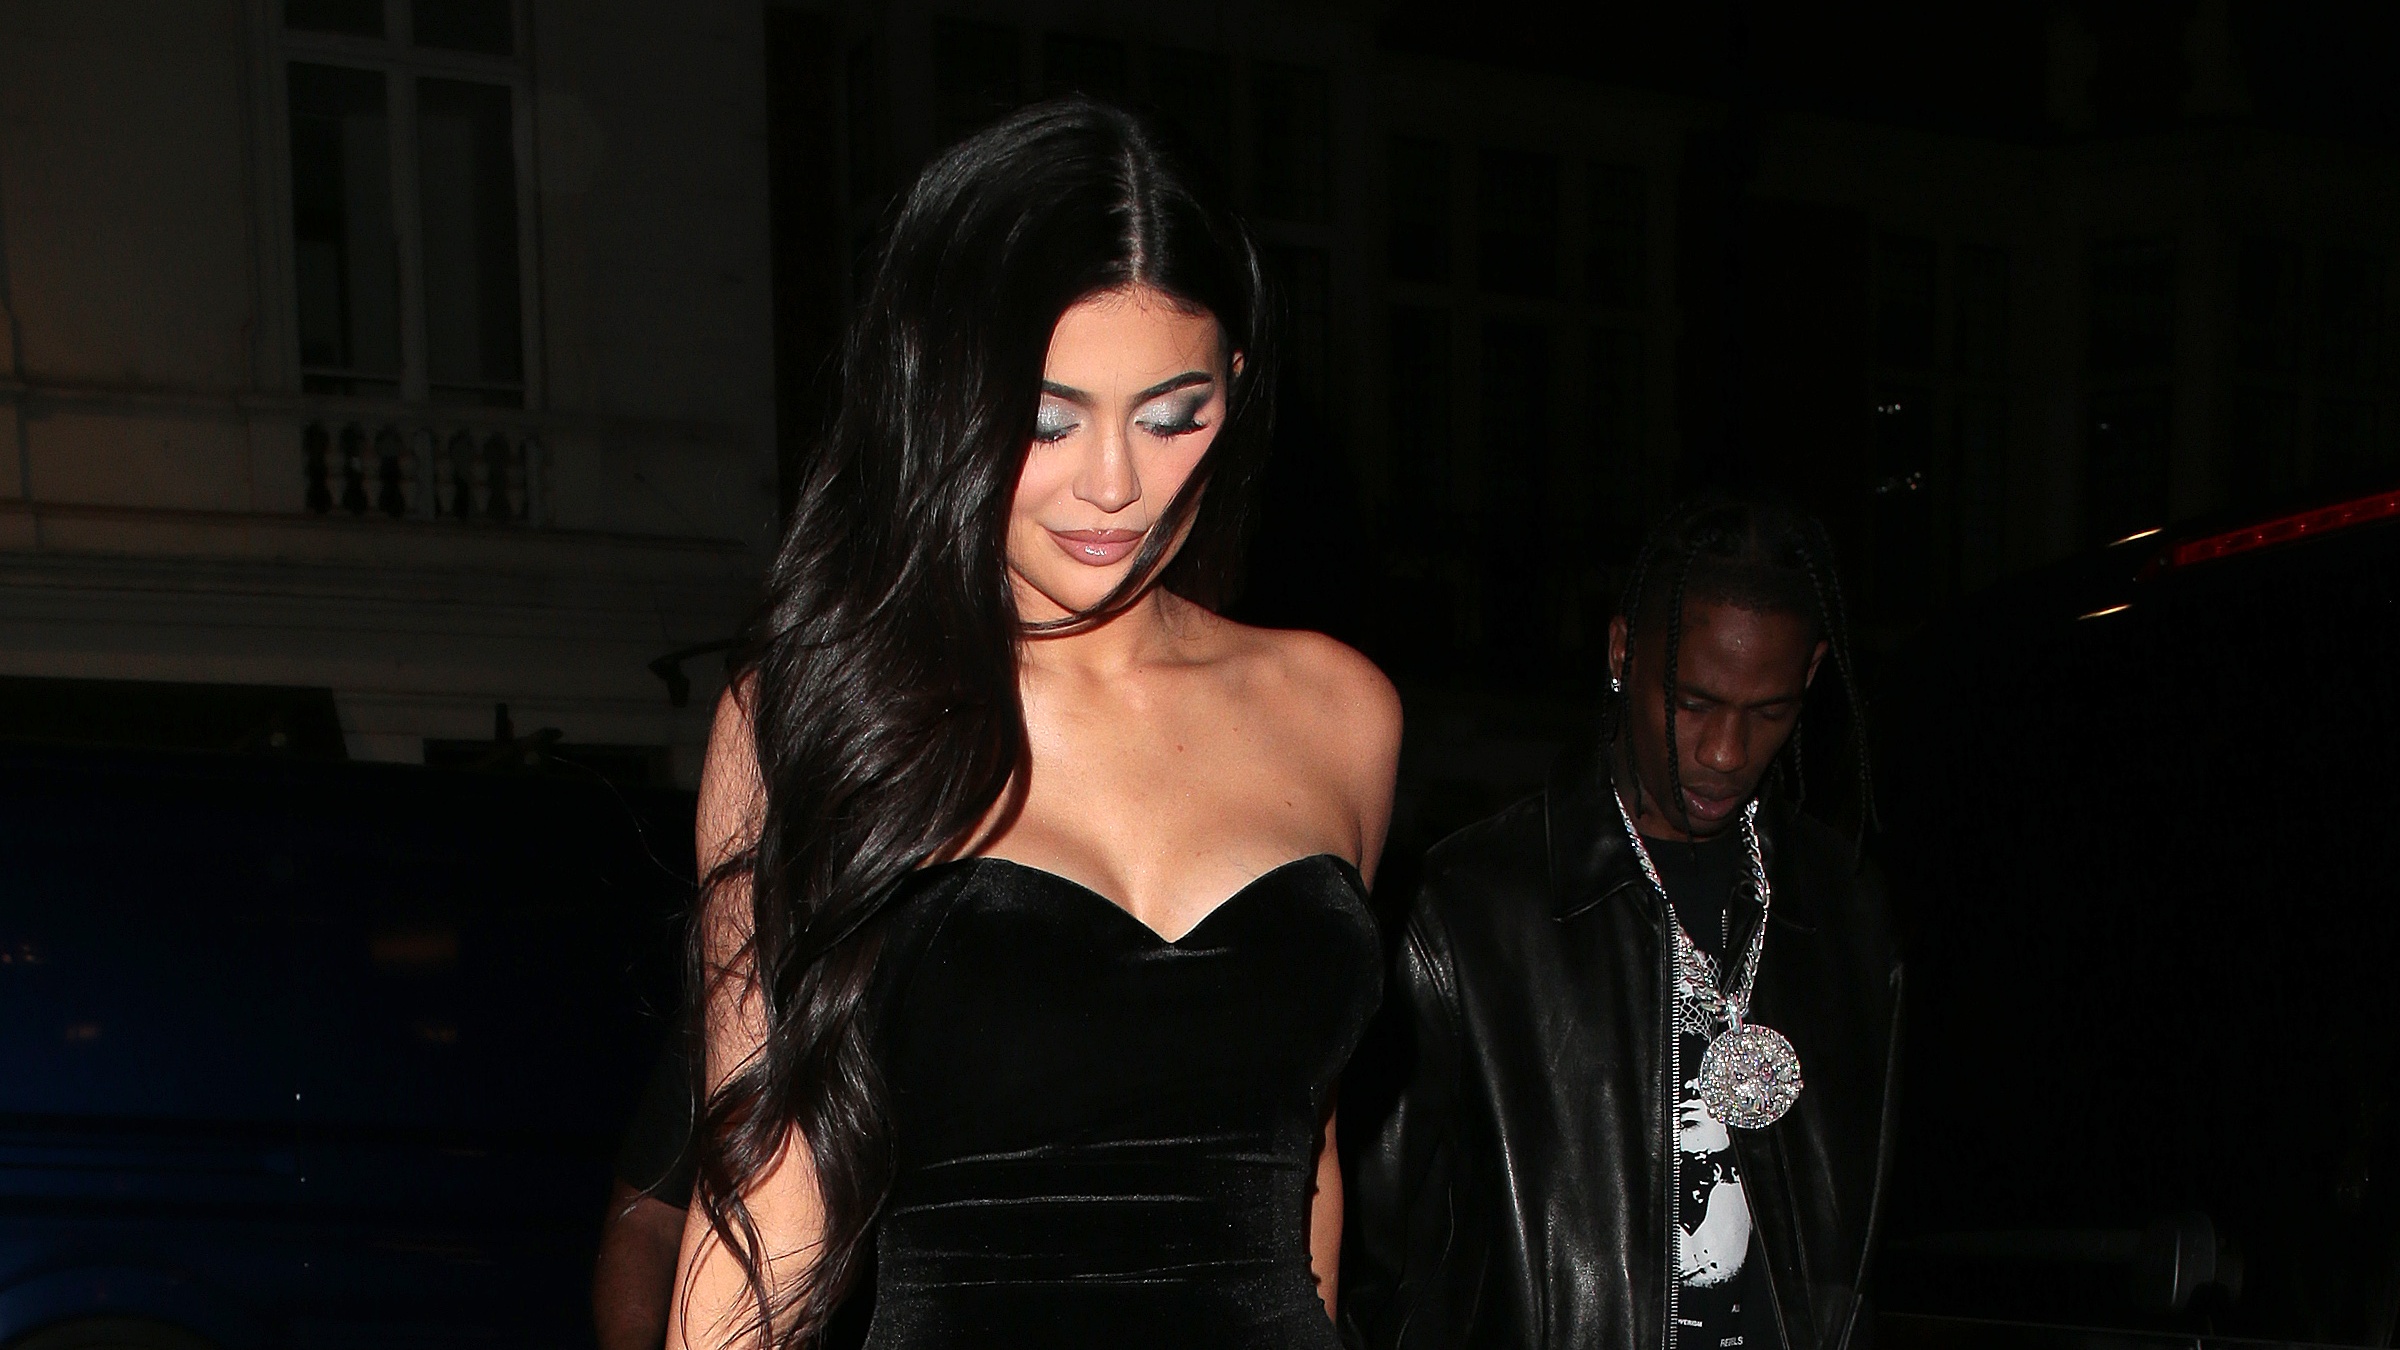 Kylie Jenner's London outfits take tourist chic to a whole new level